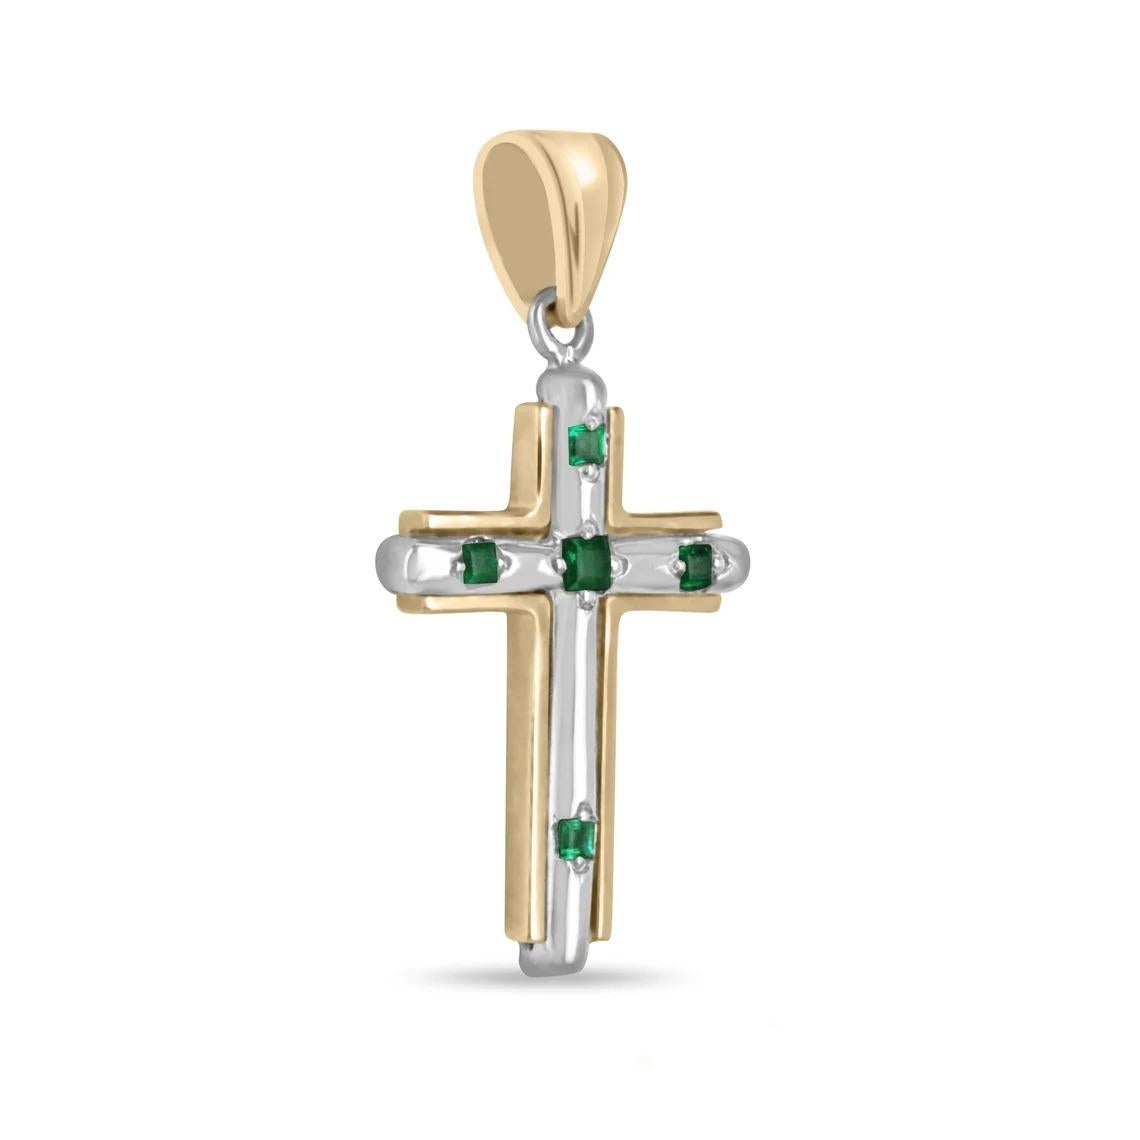 Behold the exquisite Colombian Emerald Gold Cross, a testament to beauty and craftsmanship. This stunning piece features five princess-cut emeralds adorning each point of the cross, radiating elegance with their rich, verdant green hue. The